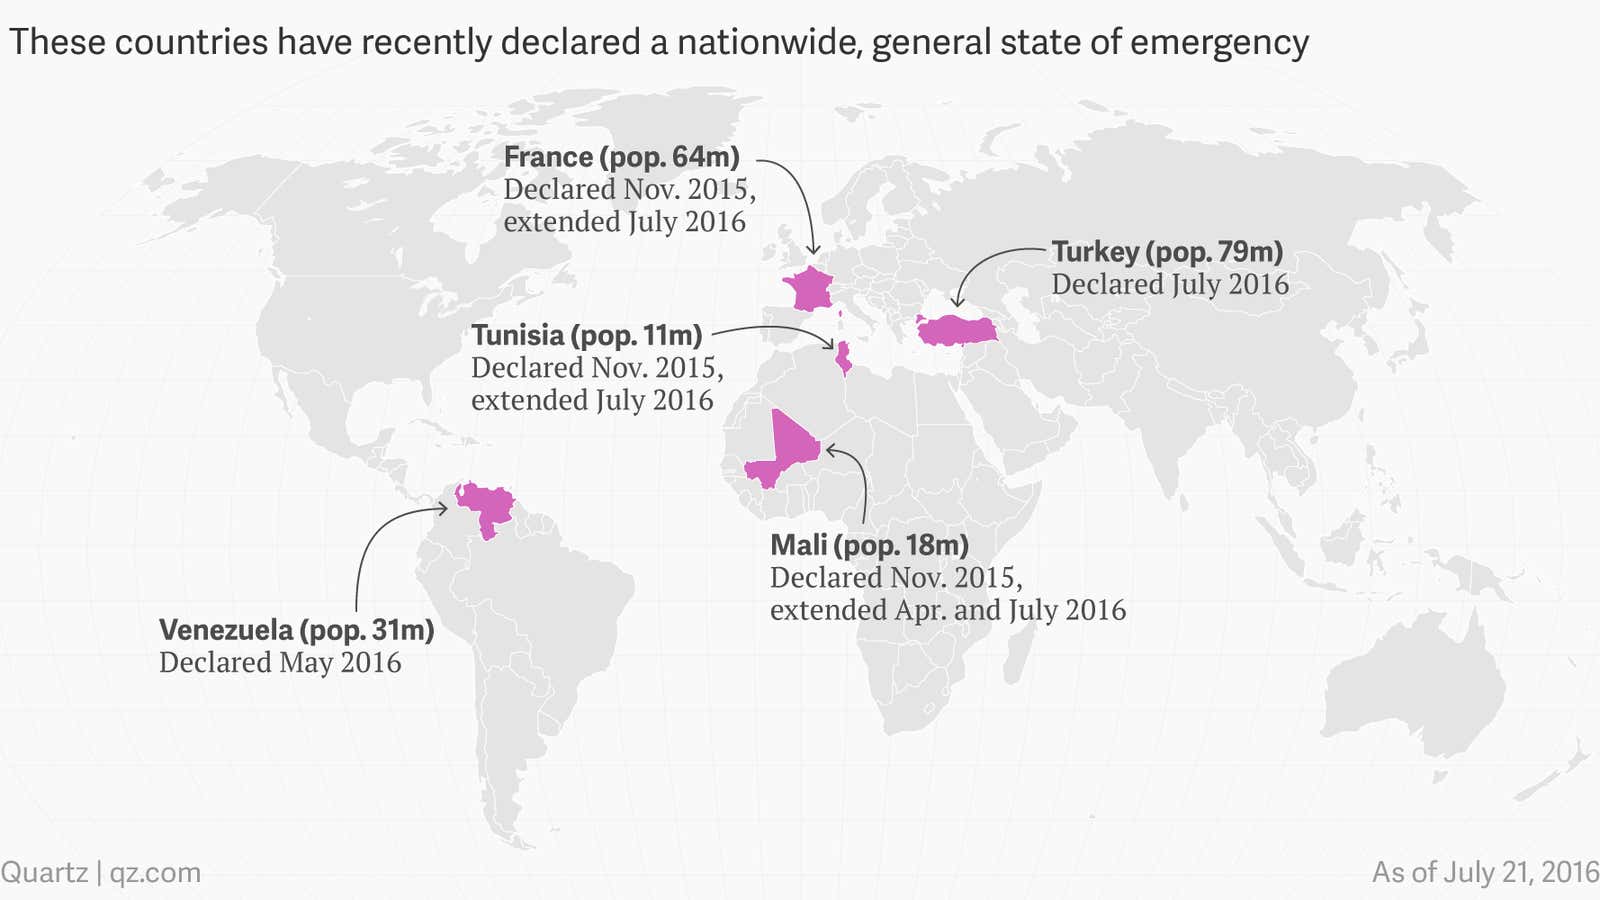 The world’s depressing state (of emergency) in 2016, mapped